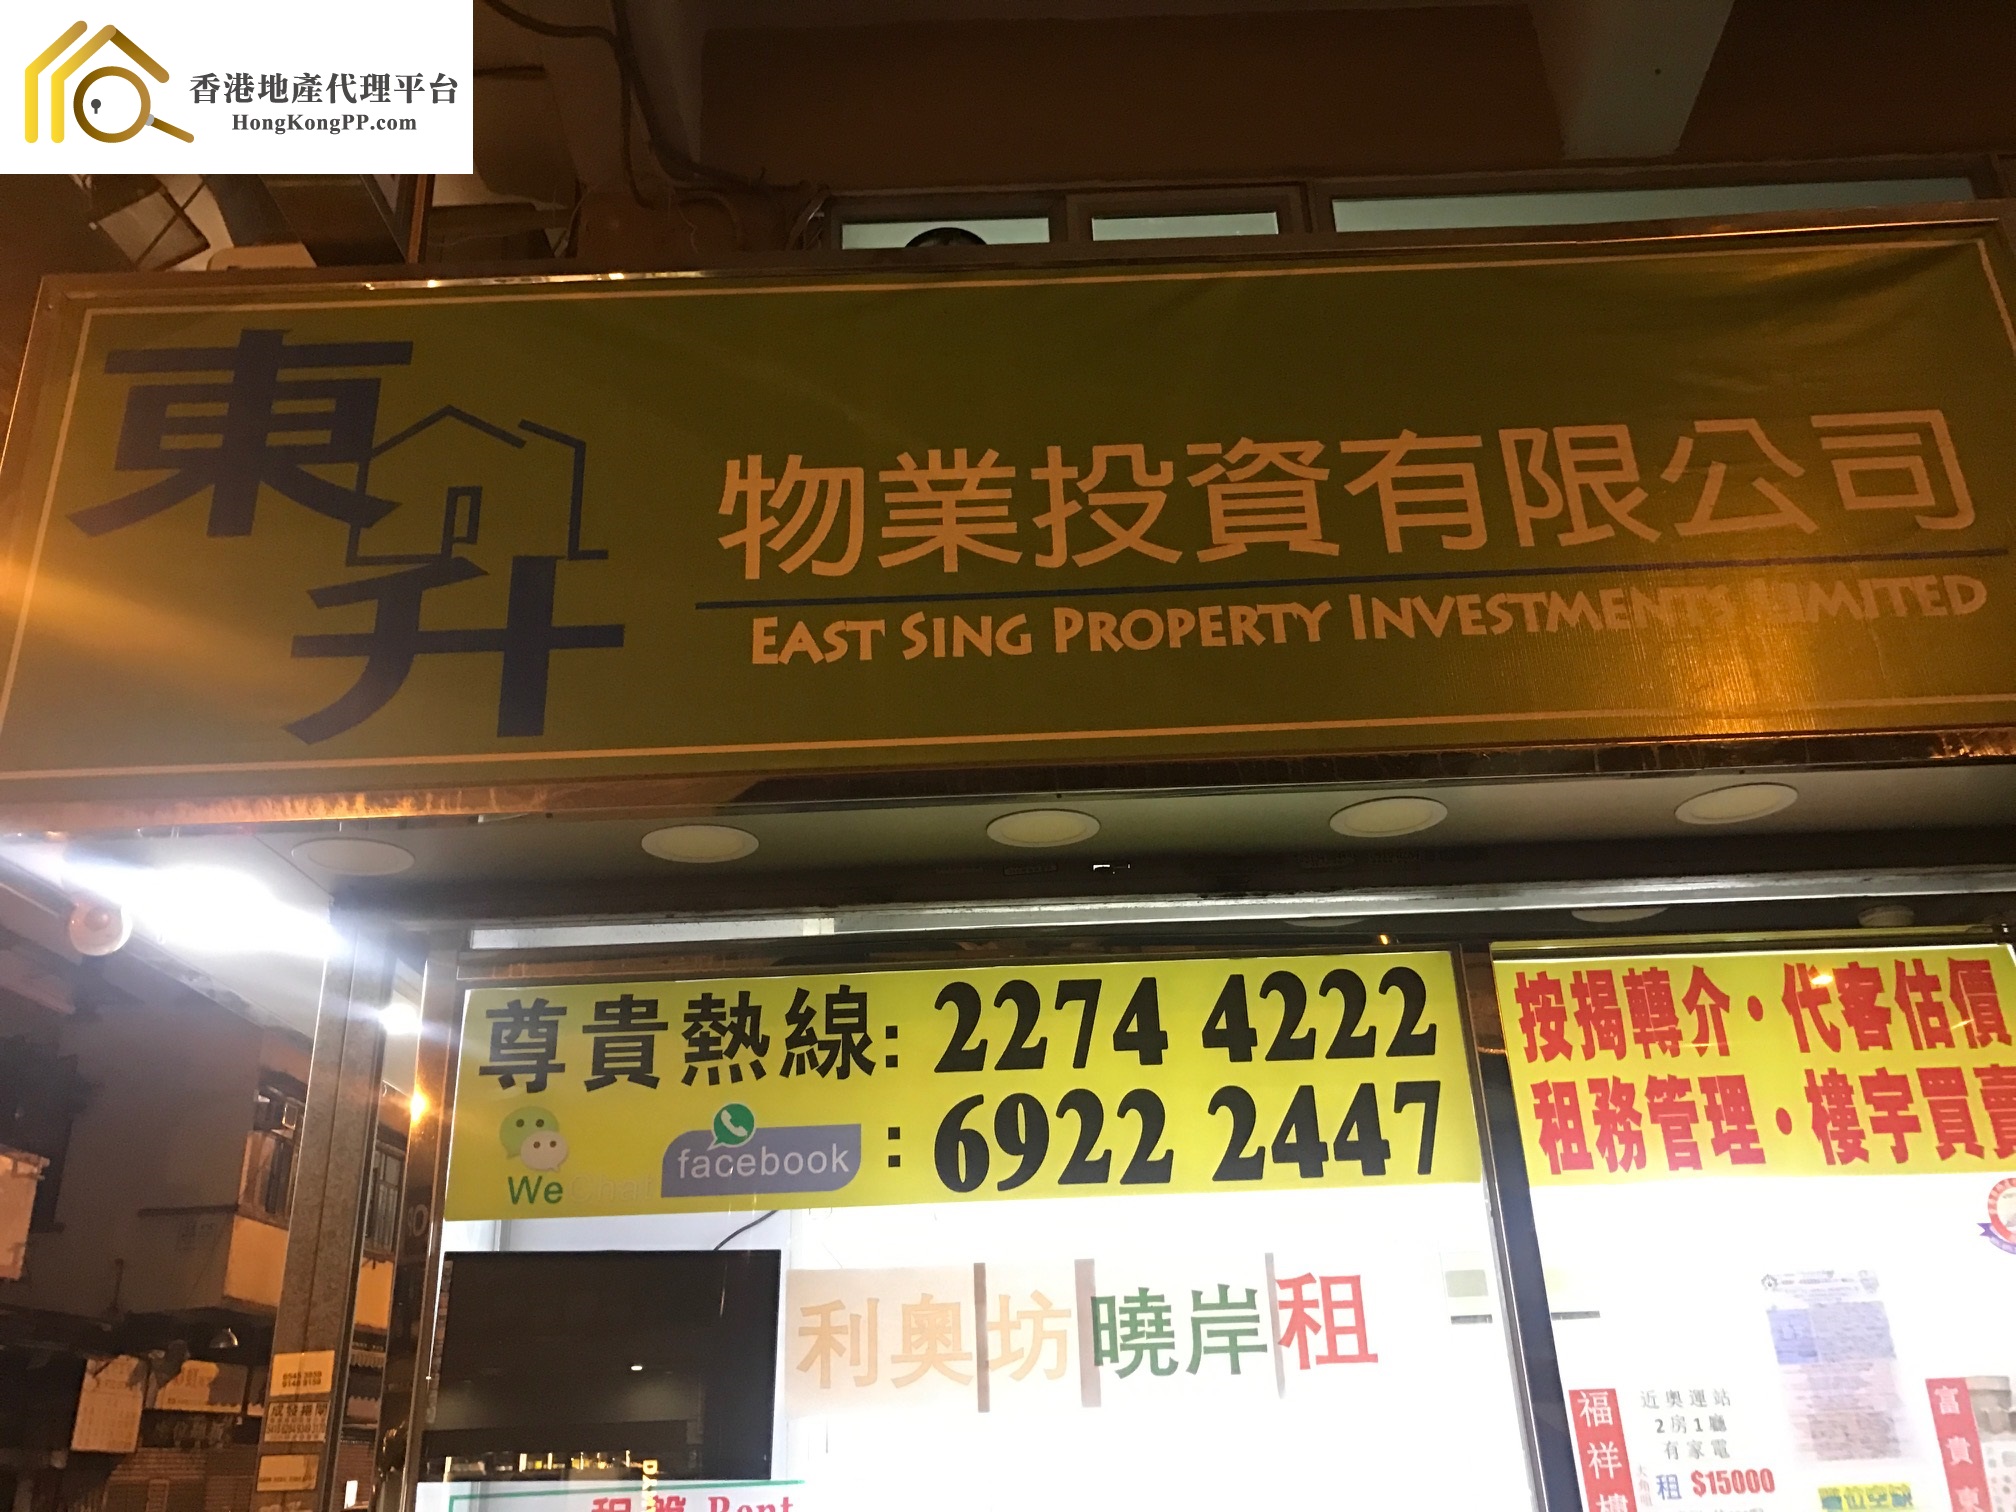 CarparkEstate Agent: 東升物業投資 East Sing Property Investments